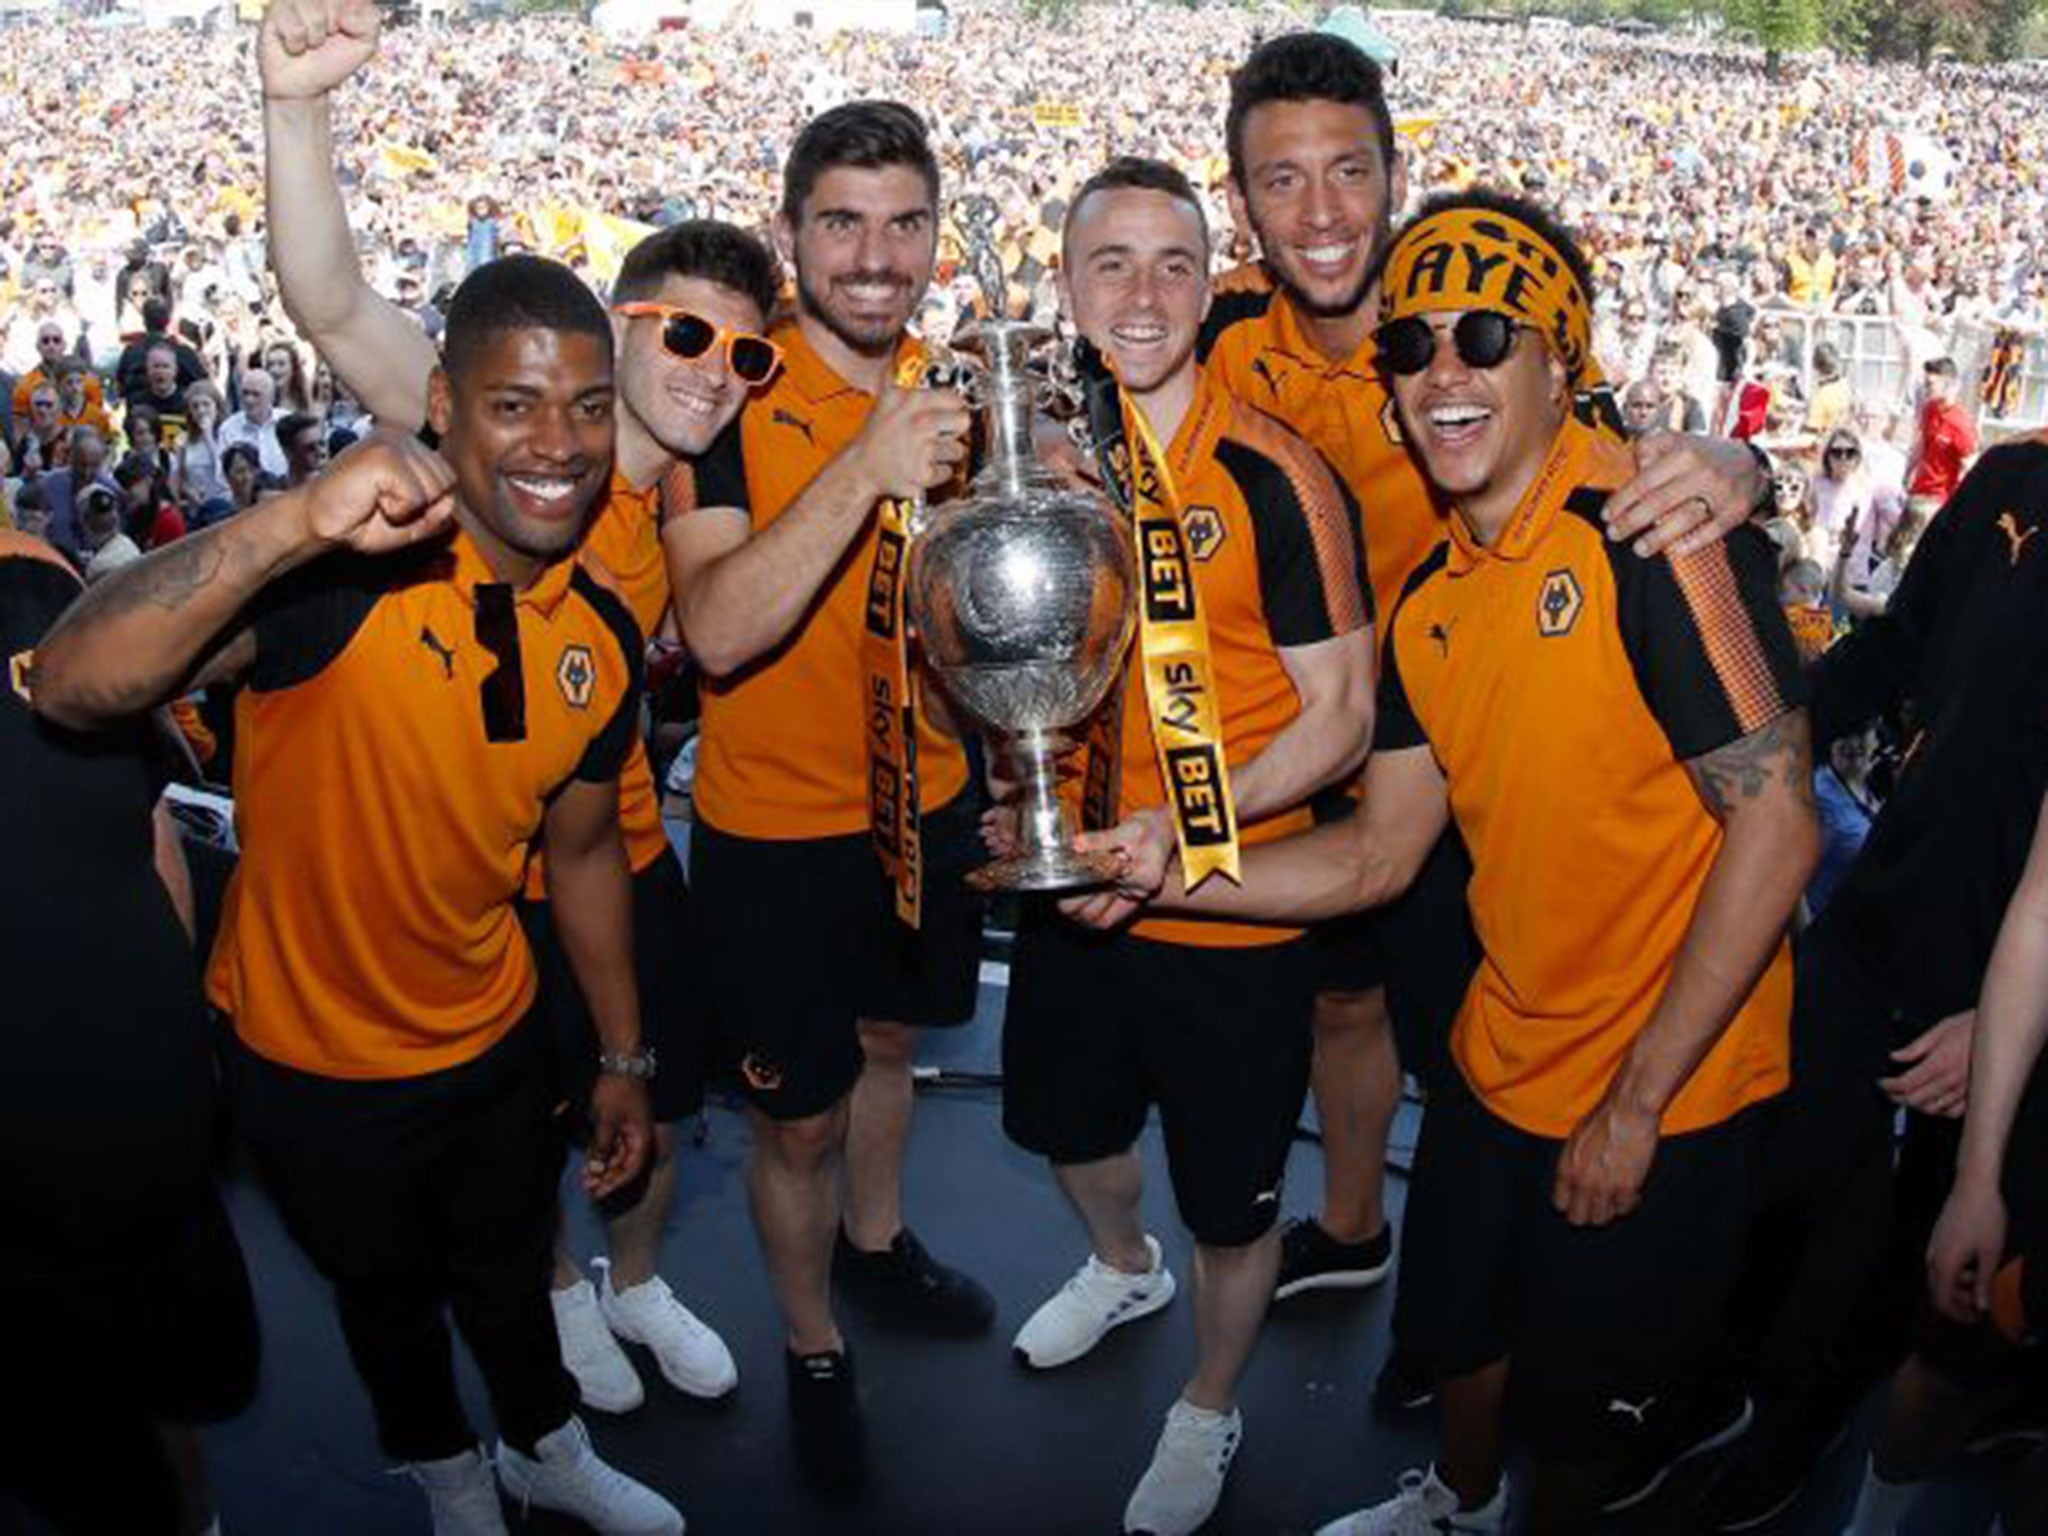 Wolves are heading back to the Premier League after a spectacular season